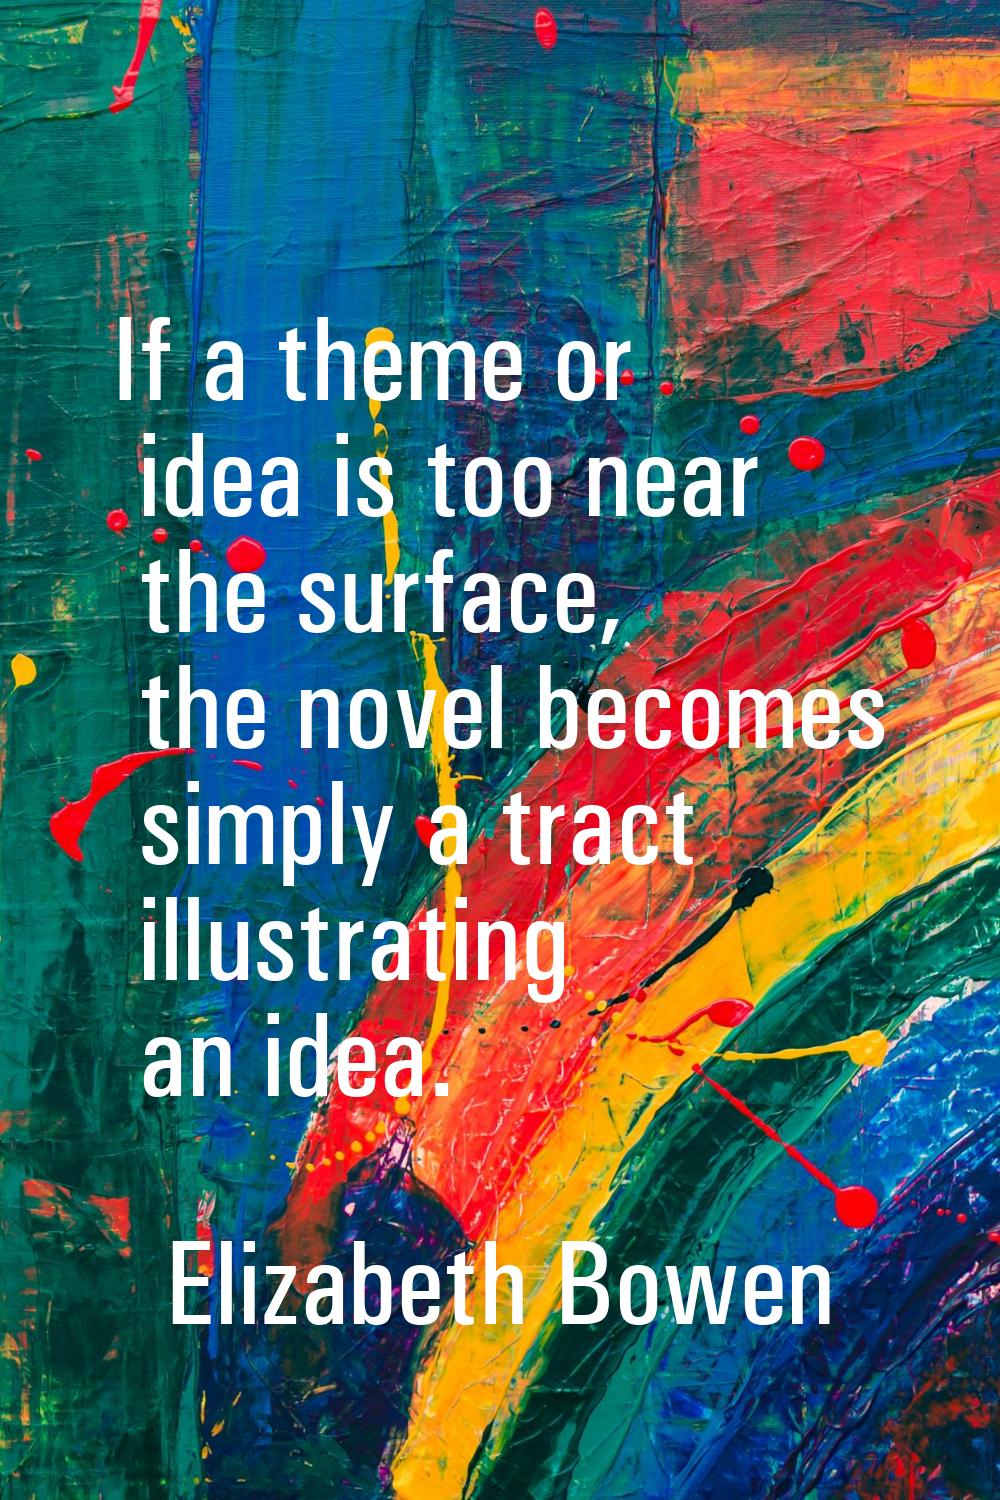 If a theme or idea is too near the surface, the novel becomes simply a tract illustrating an idea.